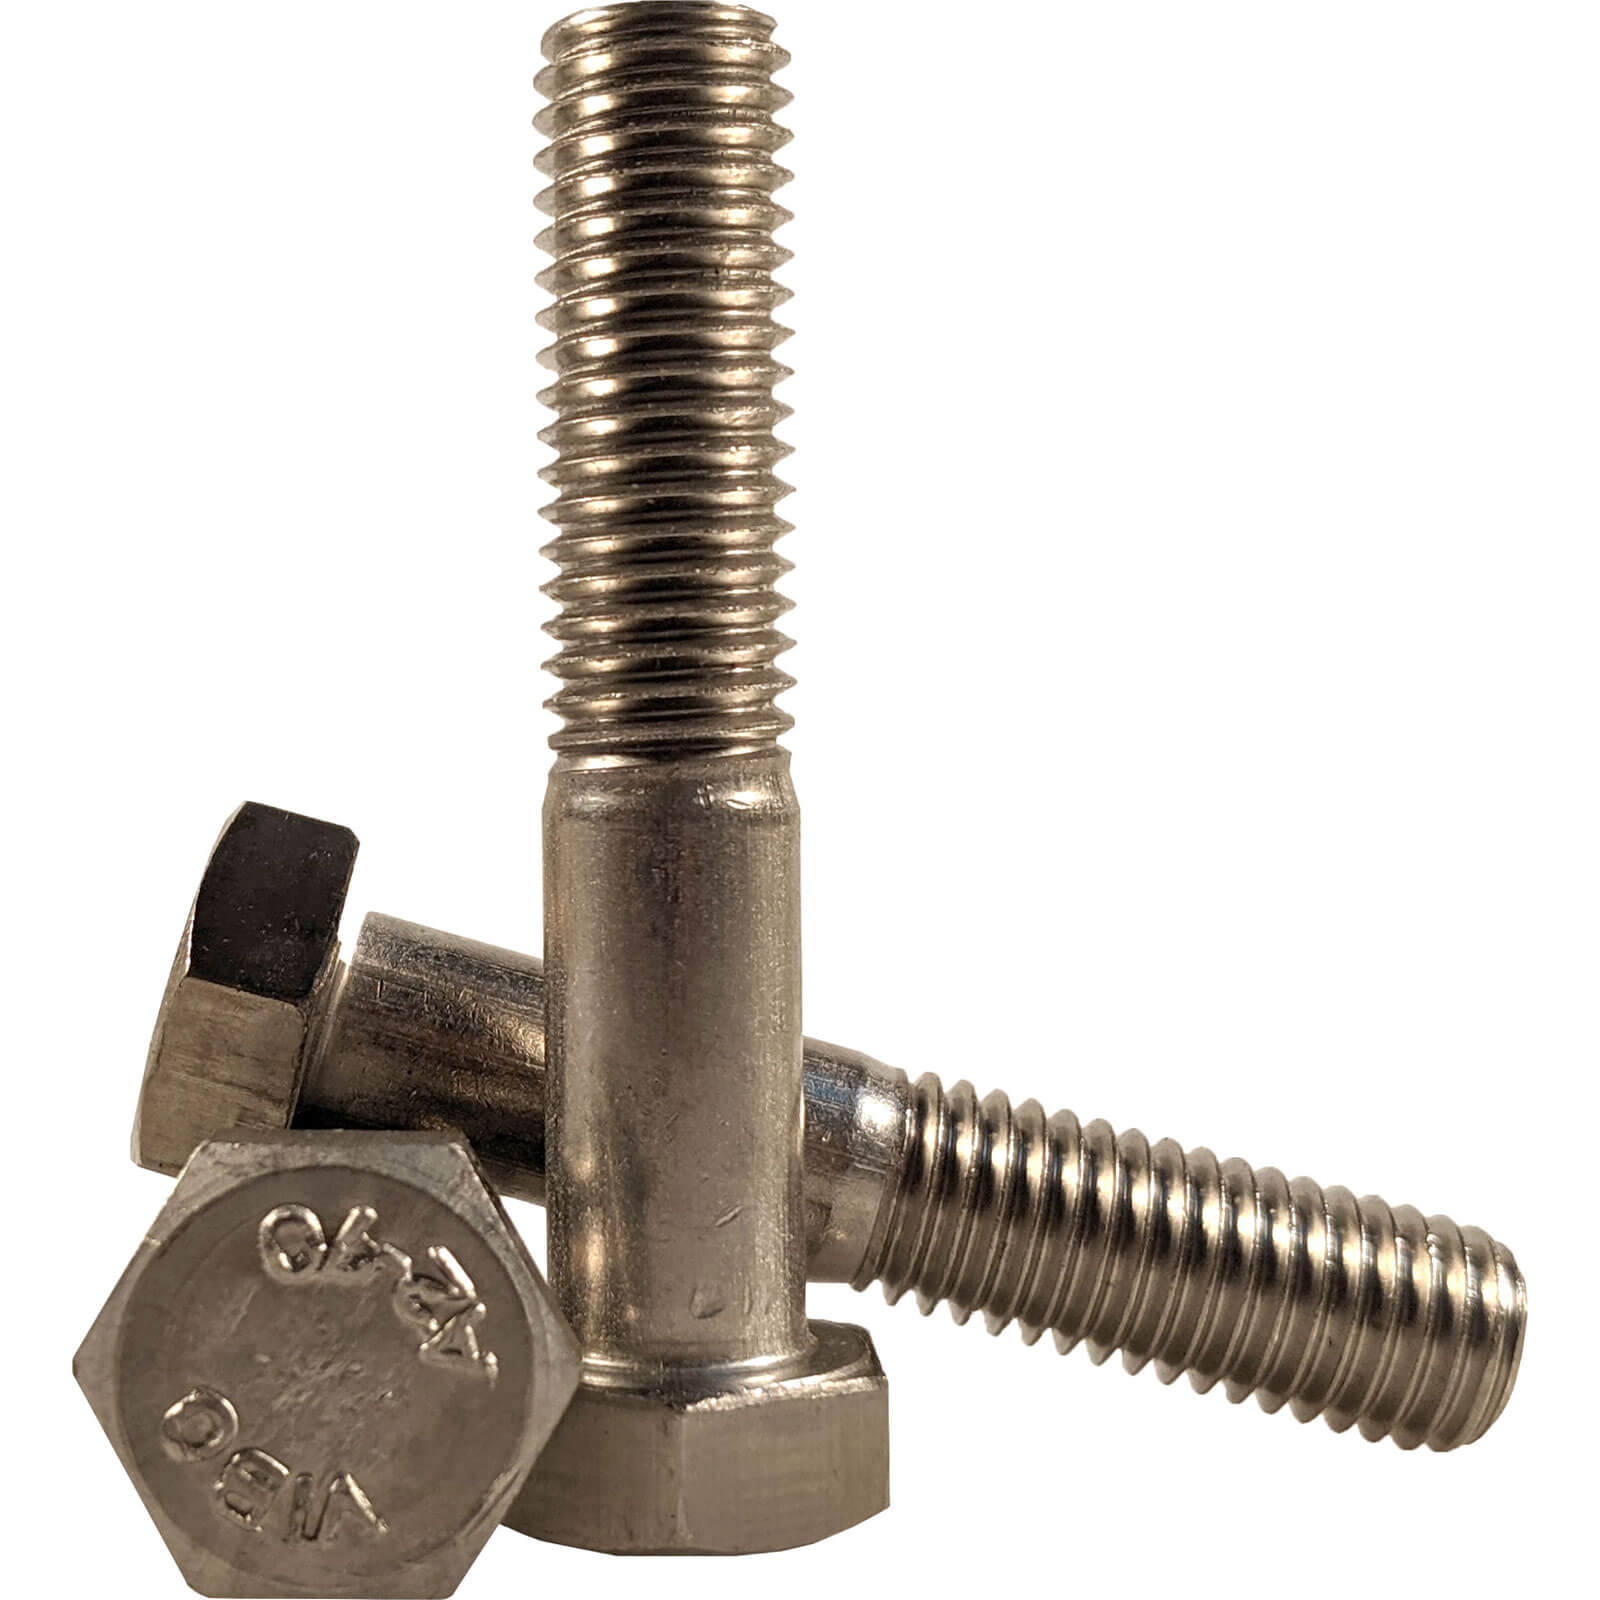 Image of Sirius Bolts A4 316 Stainless Steel M24 150mm Pack of 1